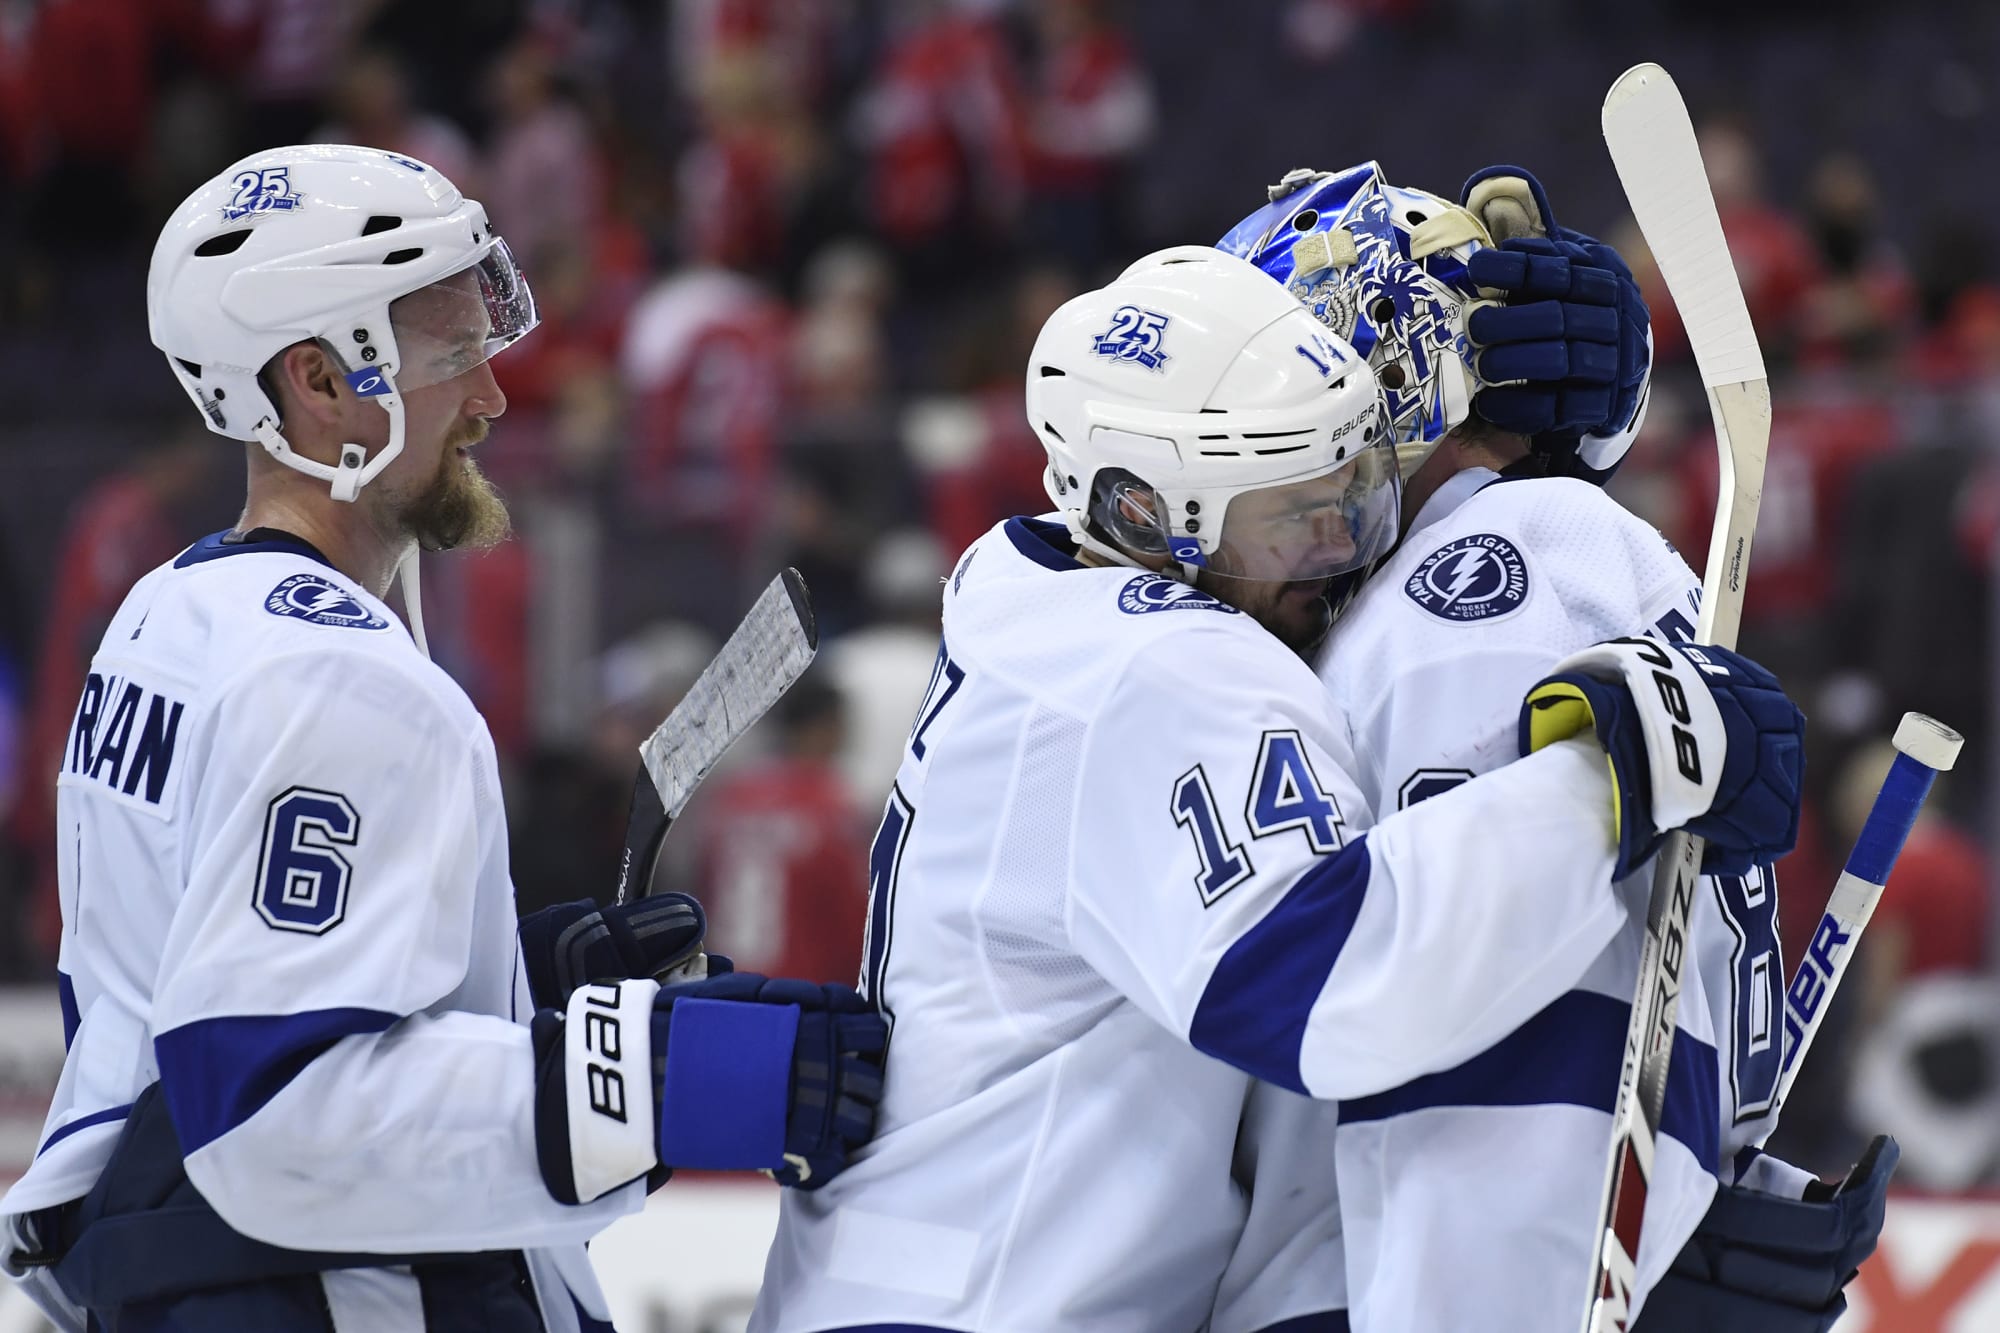 Stanley Cup Playoffs: Tampa Bay Lightning returns to form to defeat